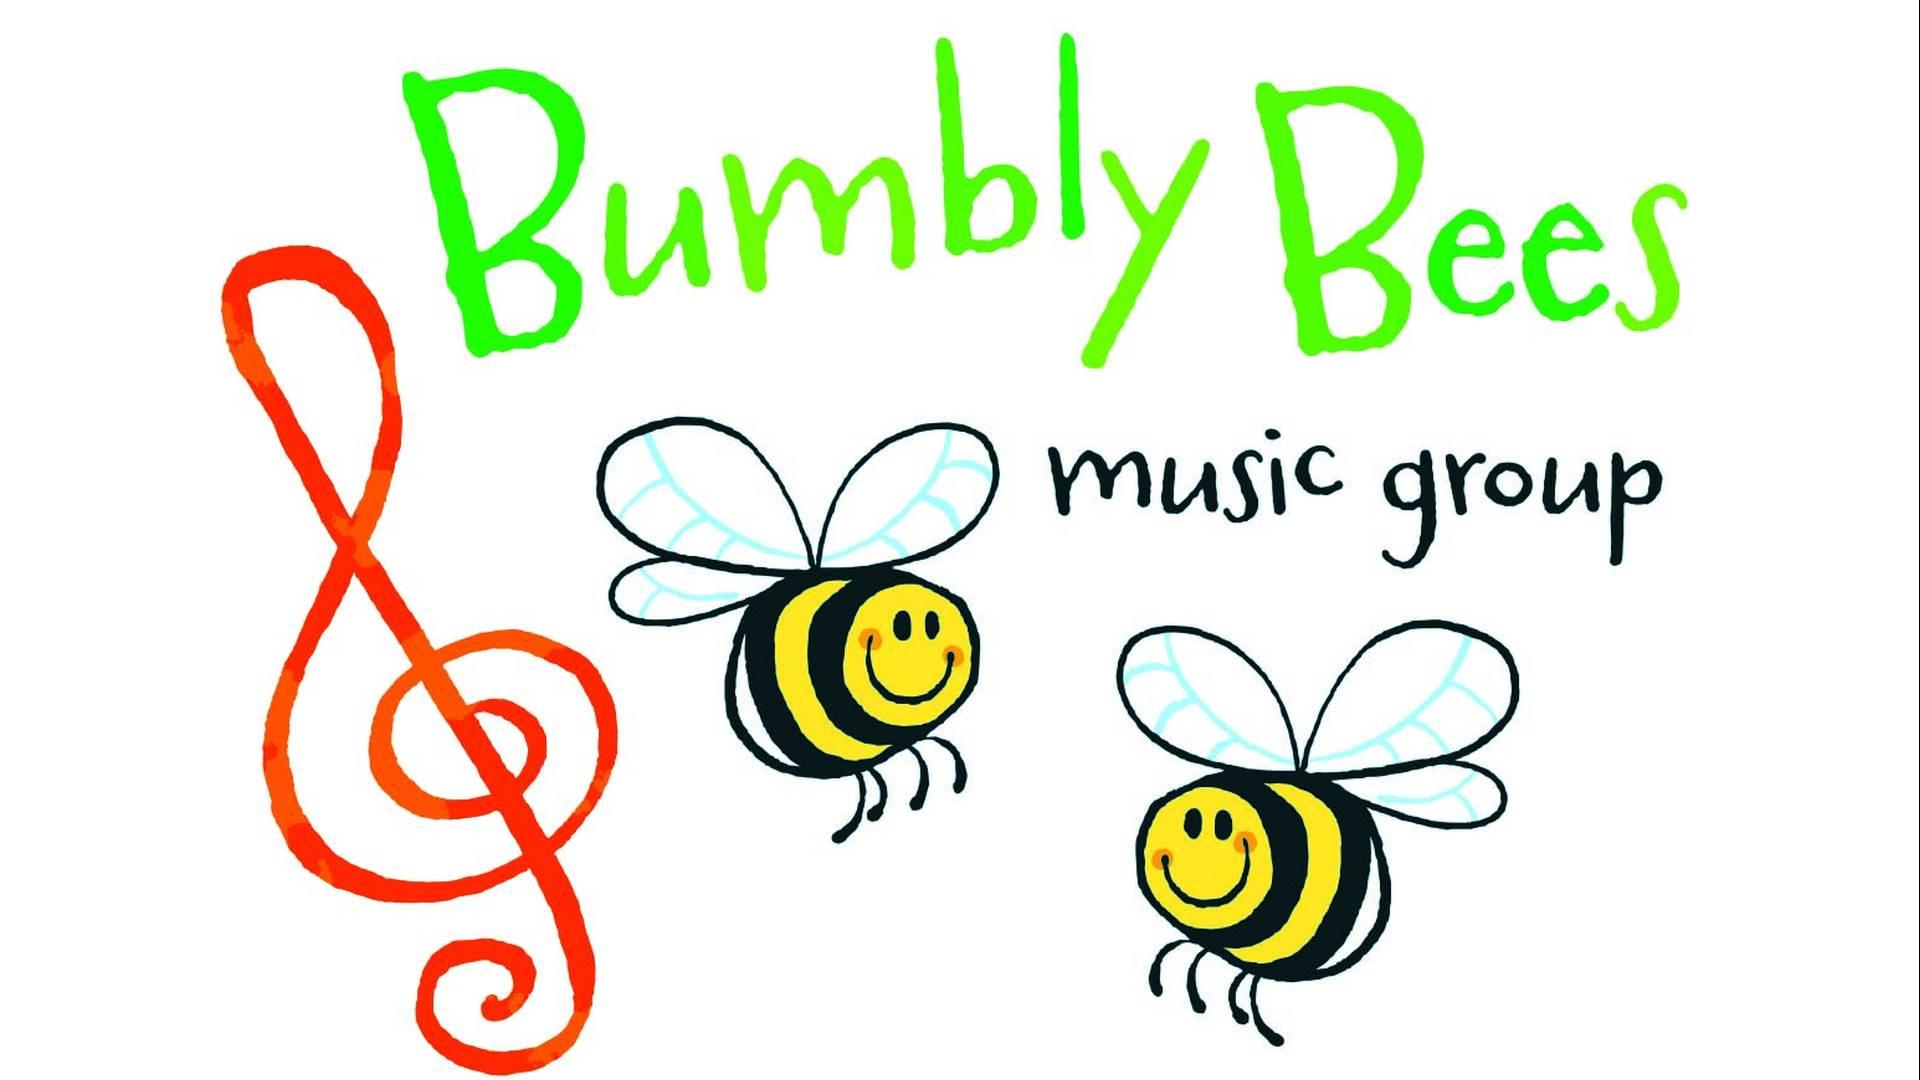 Bumbly bees music group ely photo